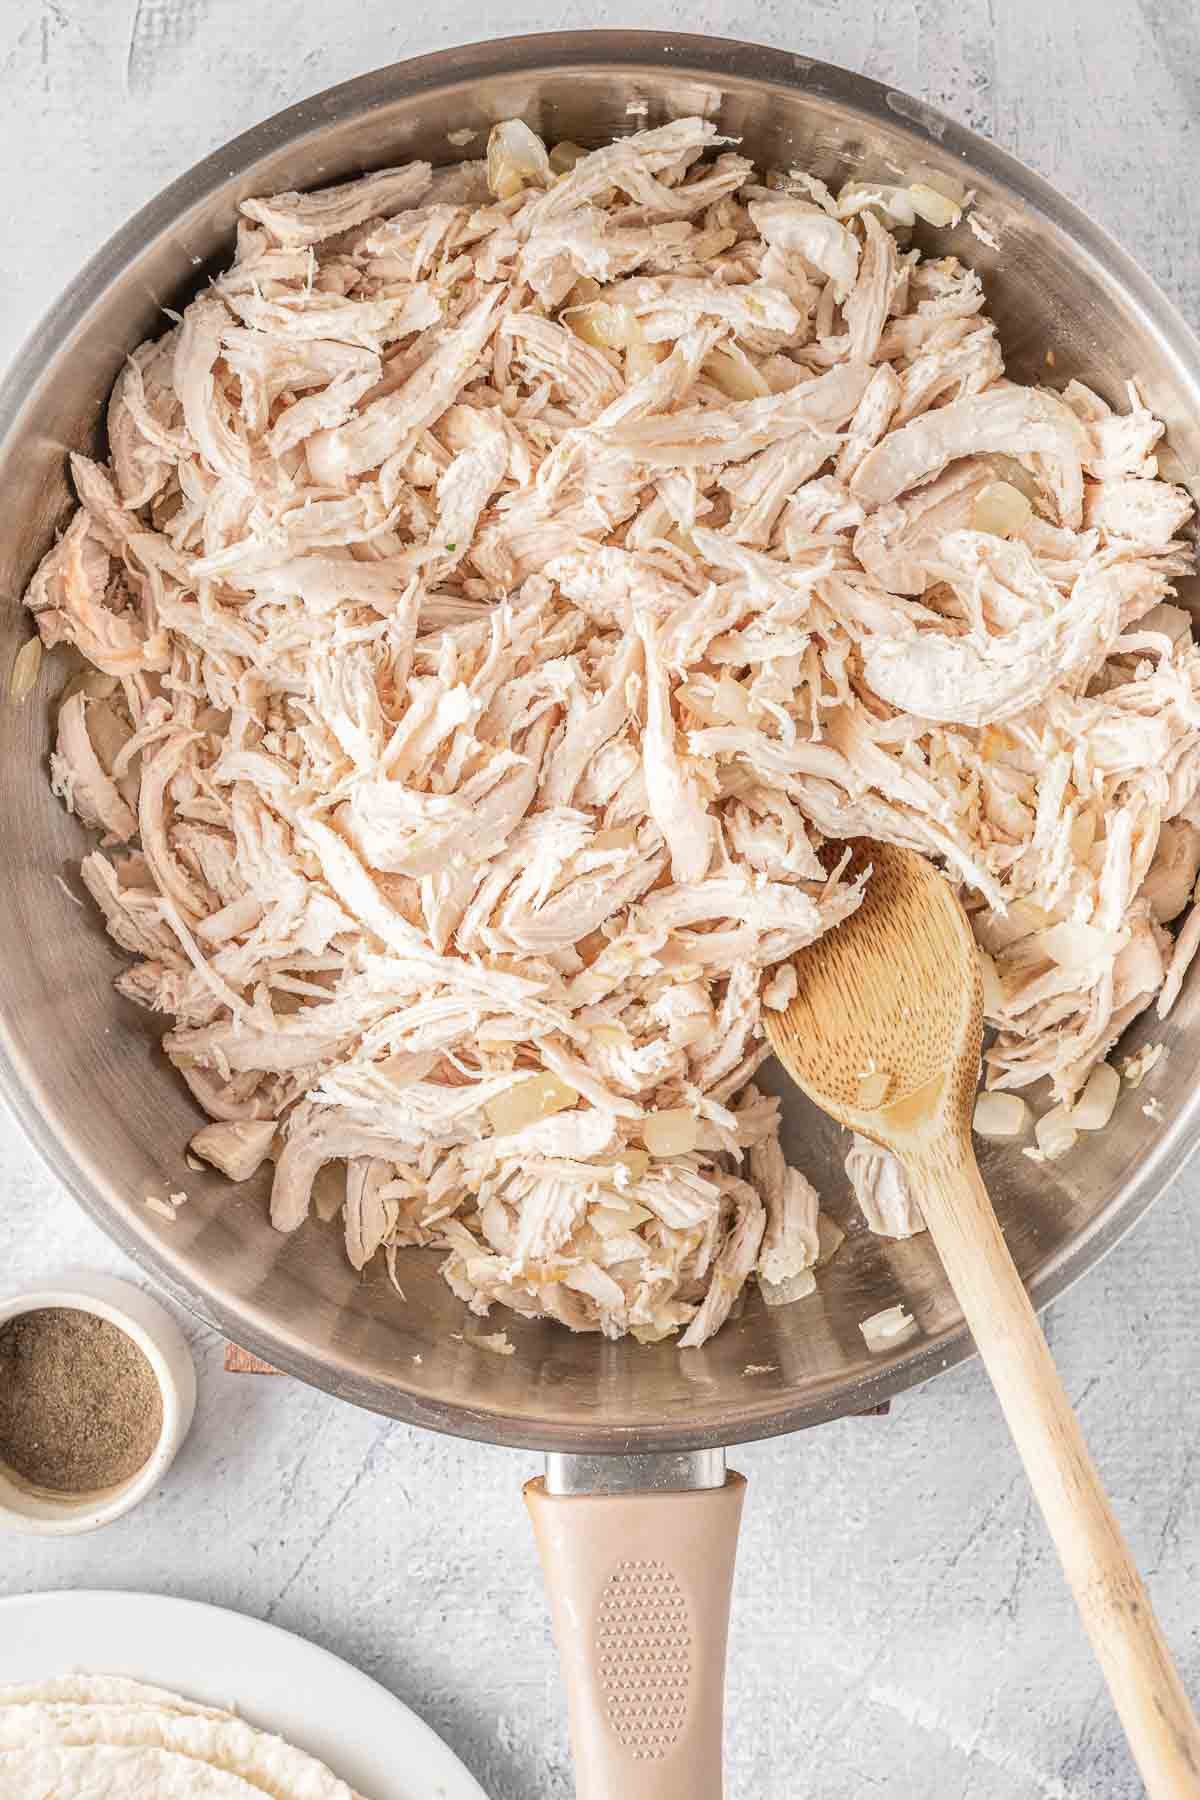 stainless steel skillet with cooked shredded chicken.